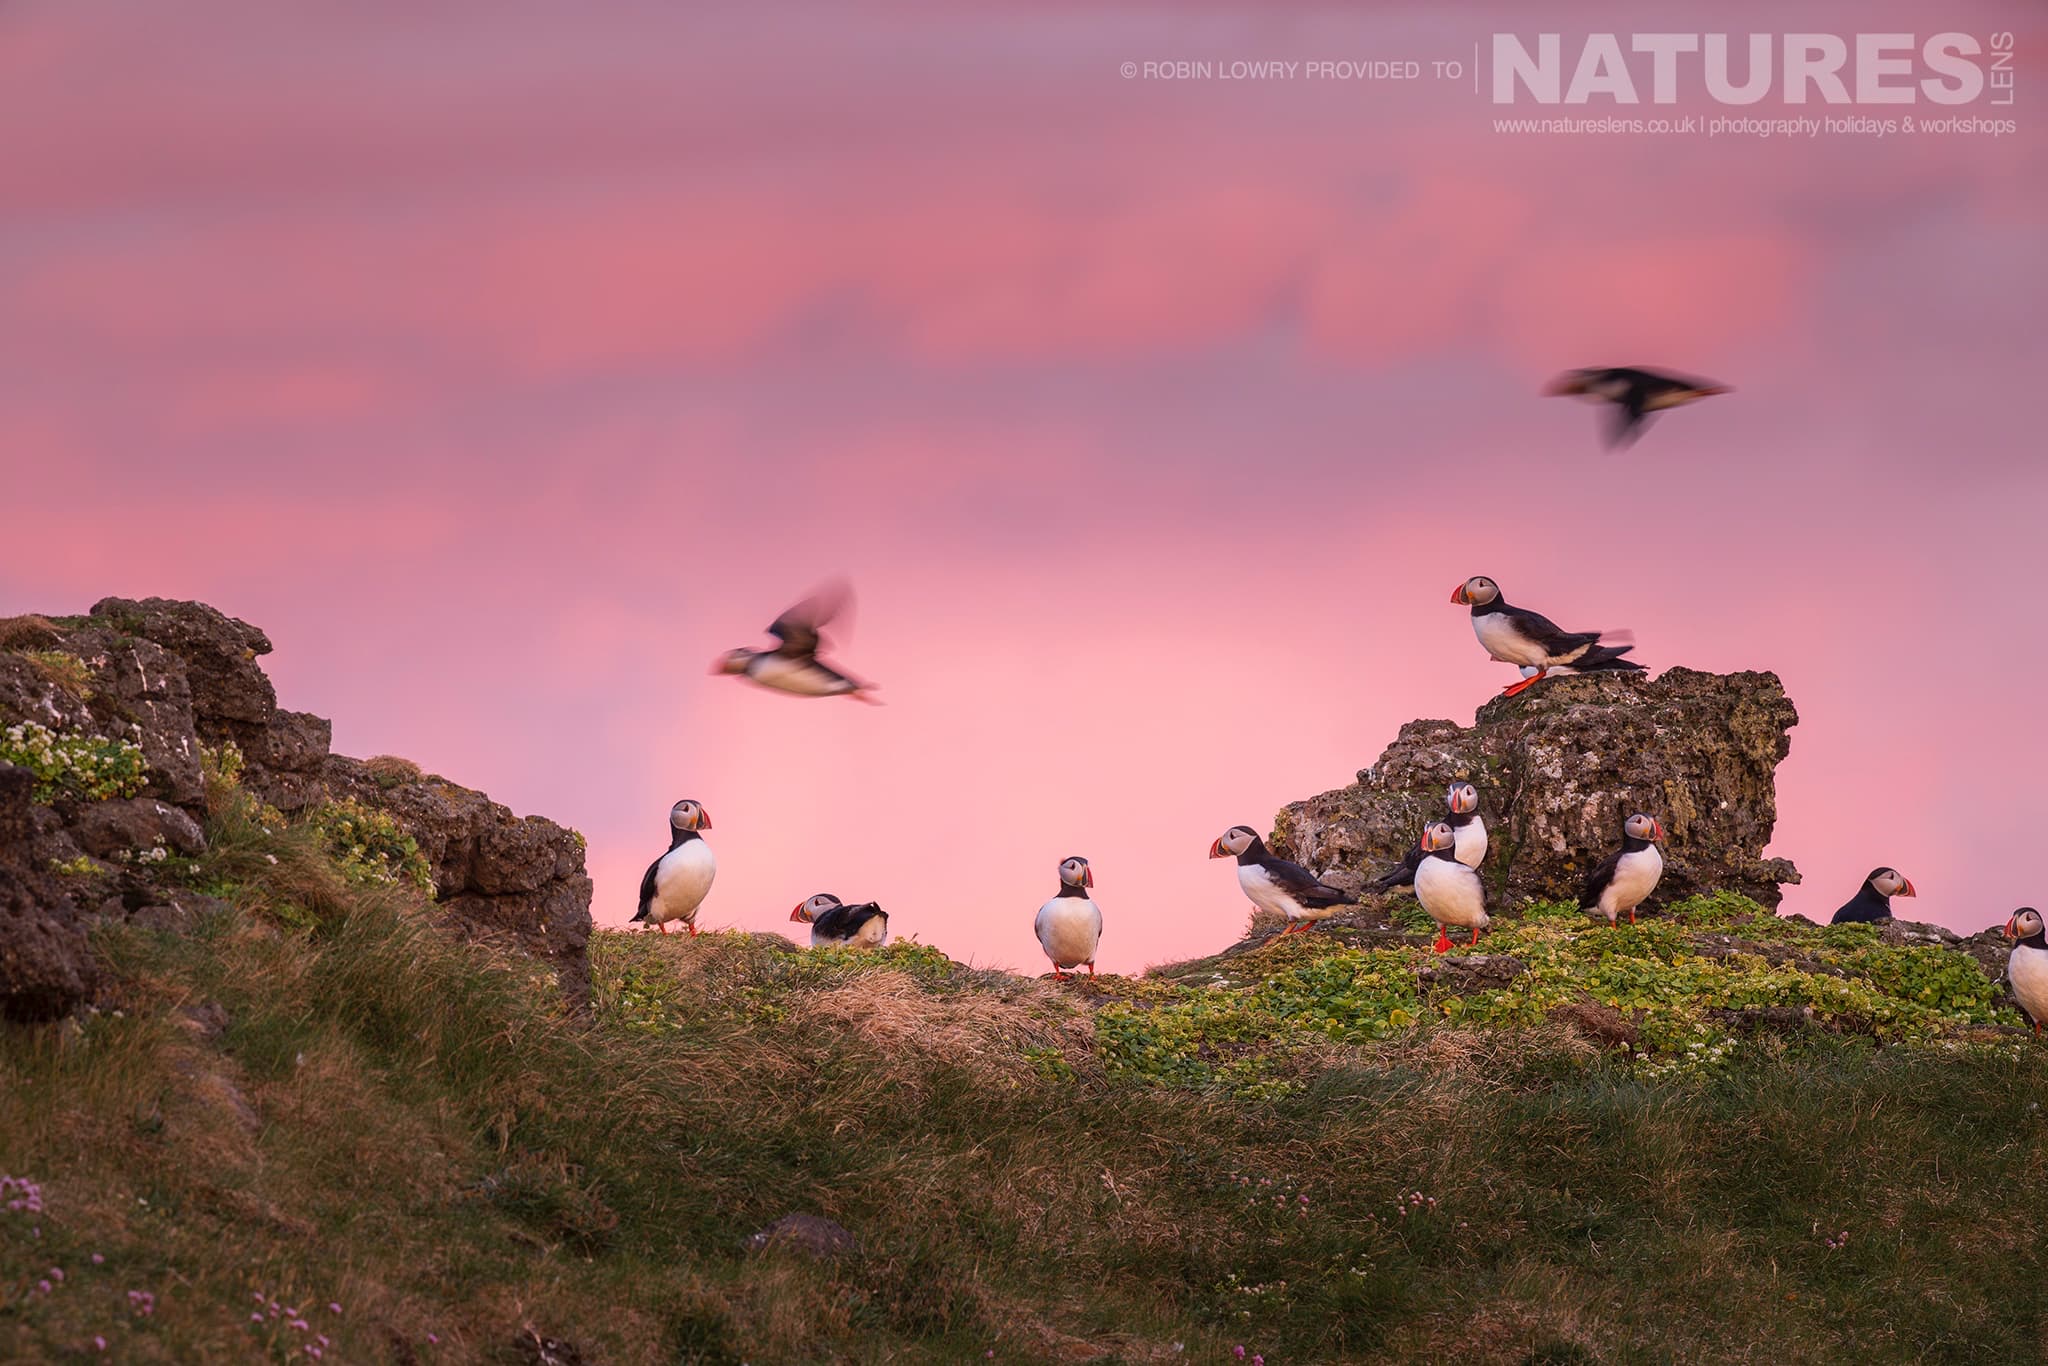 A Group Of Puffins From The Atlantic Puffin Colony Of Grímsey Island Set Against The Pink Sky